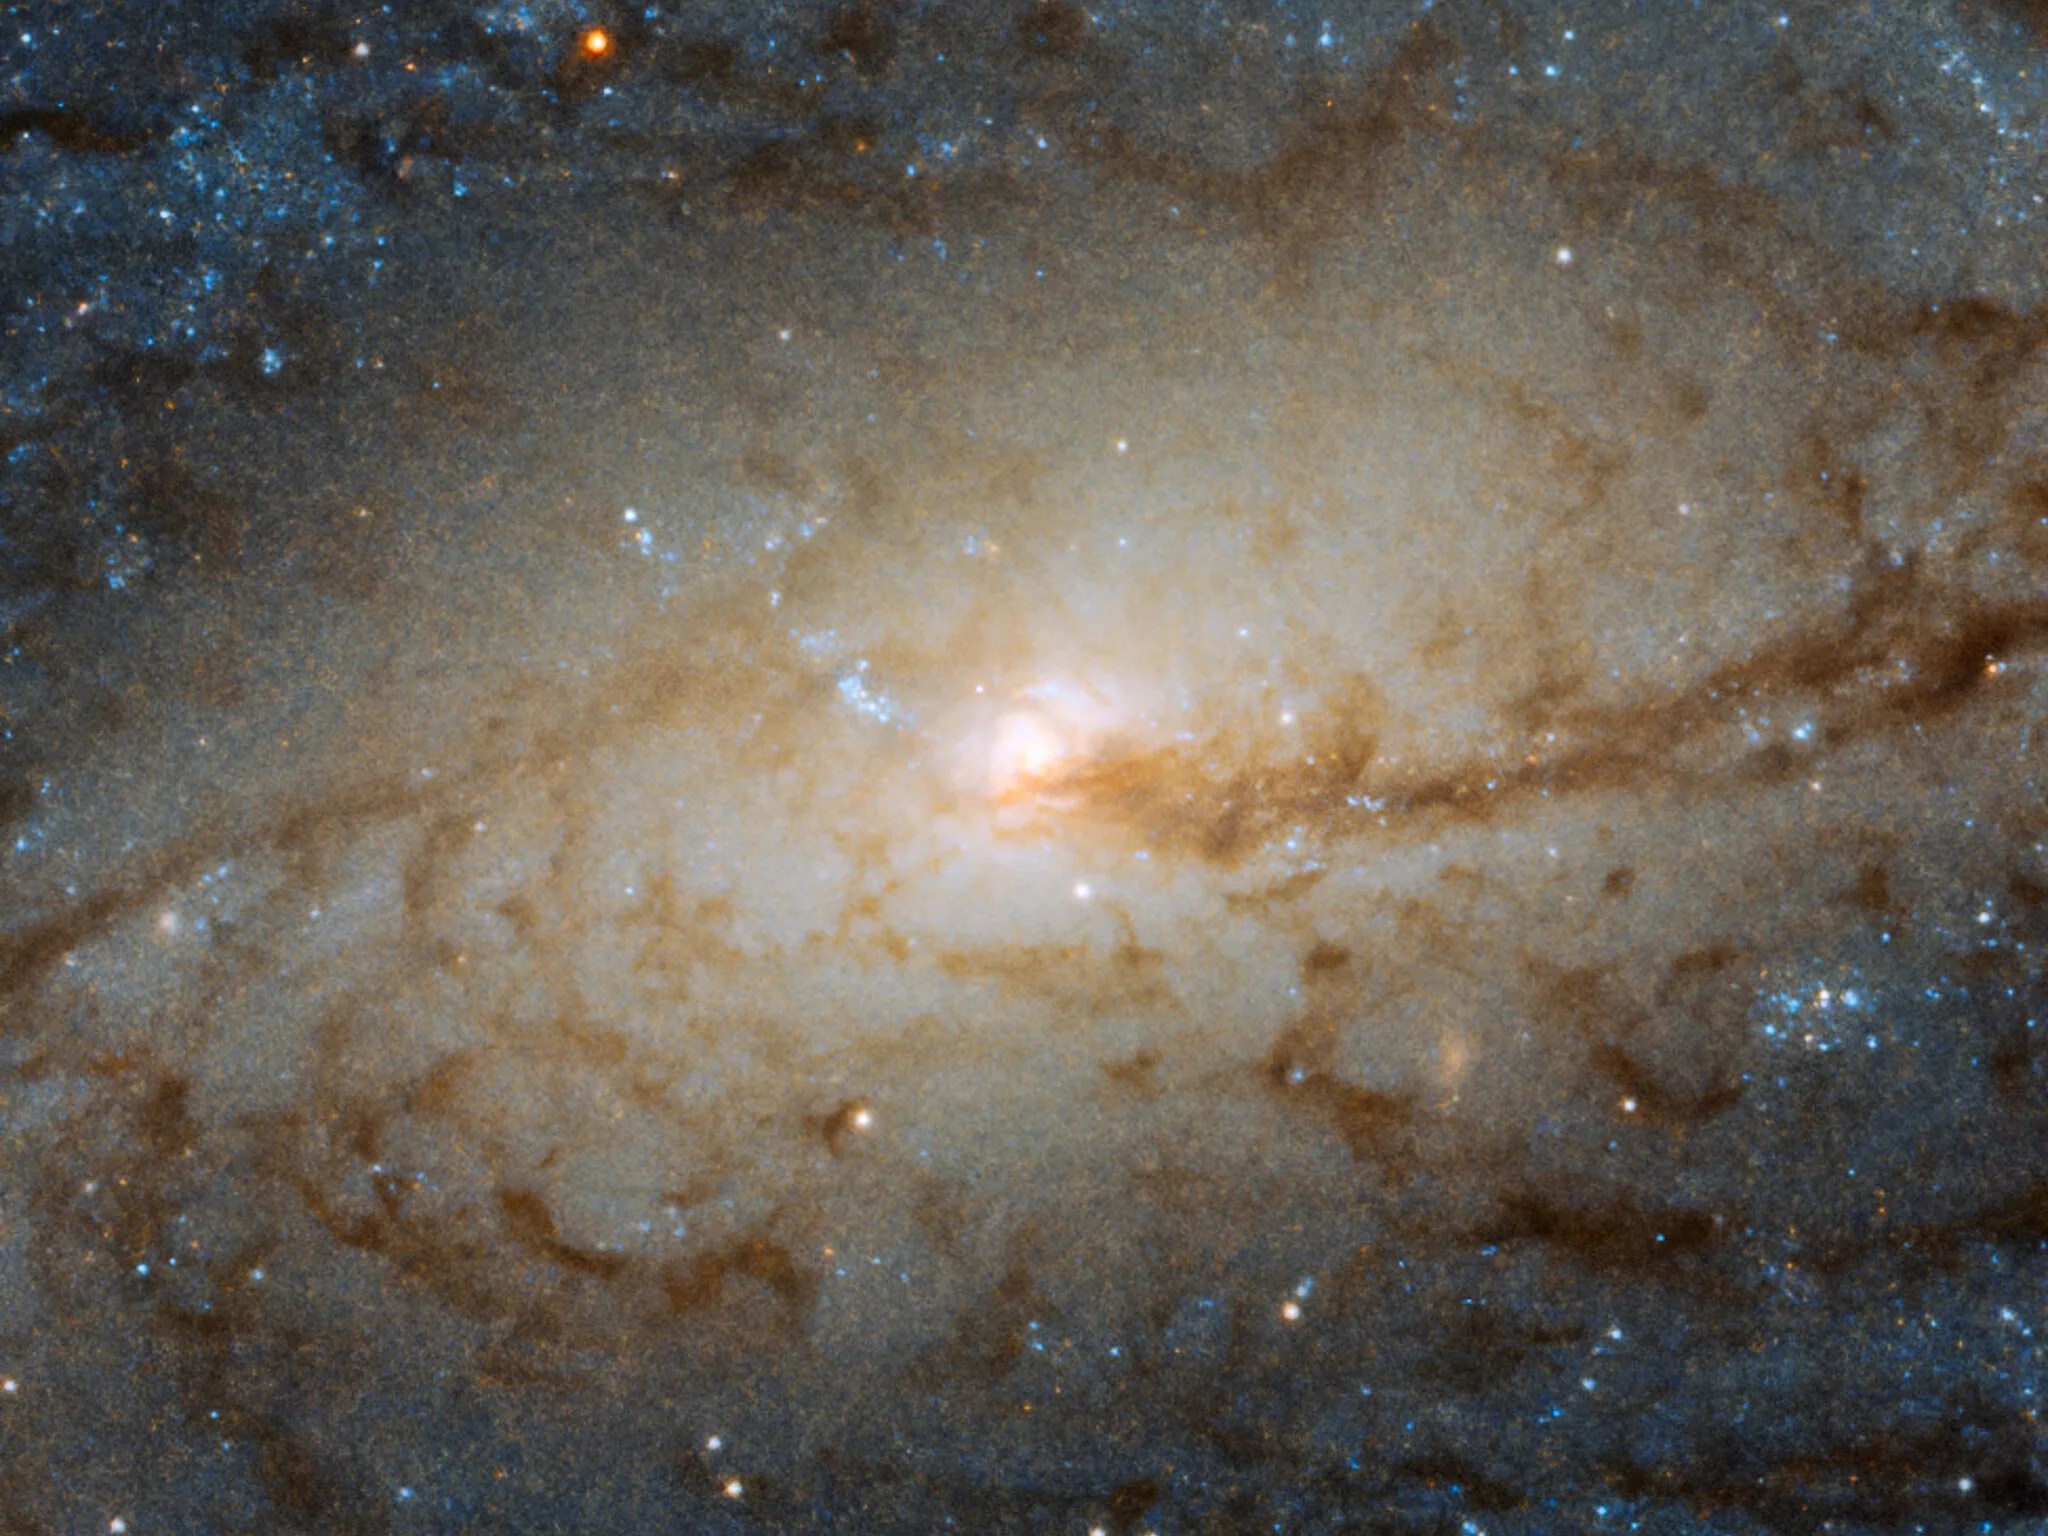 Hubble image of spiral galaxy ngc 3887